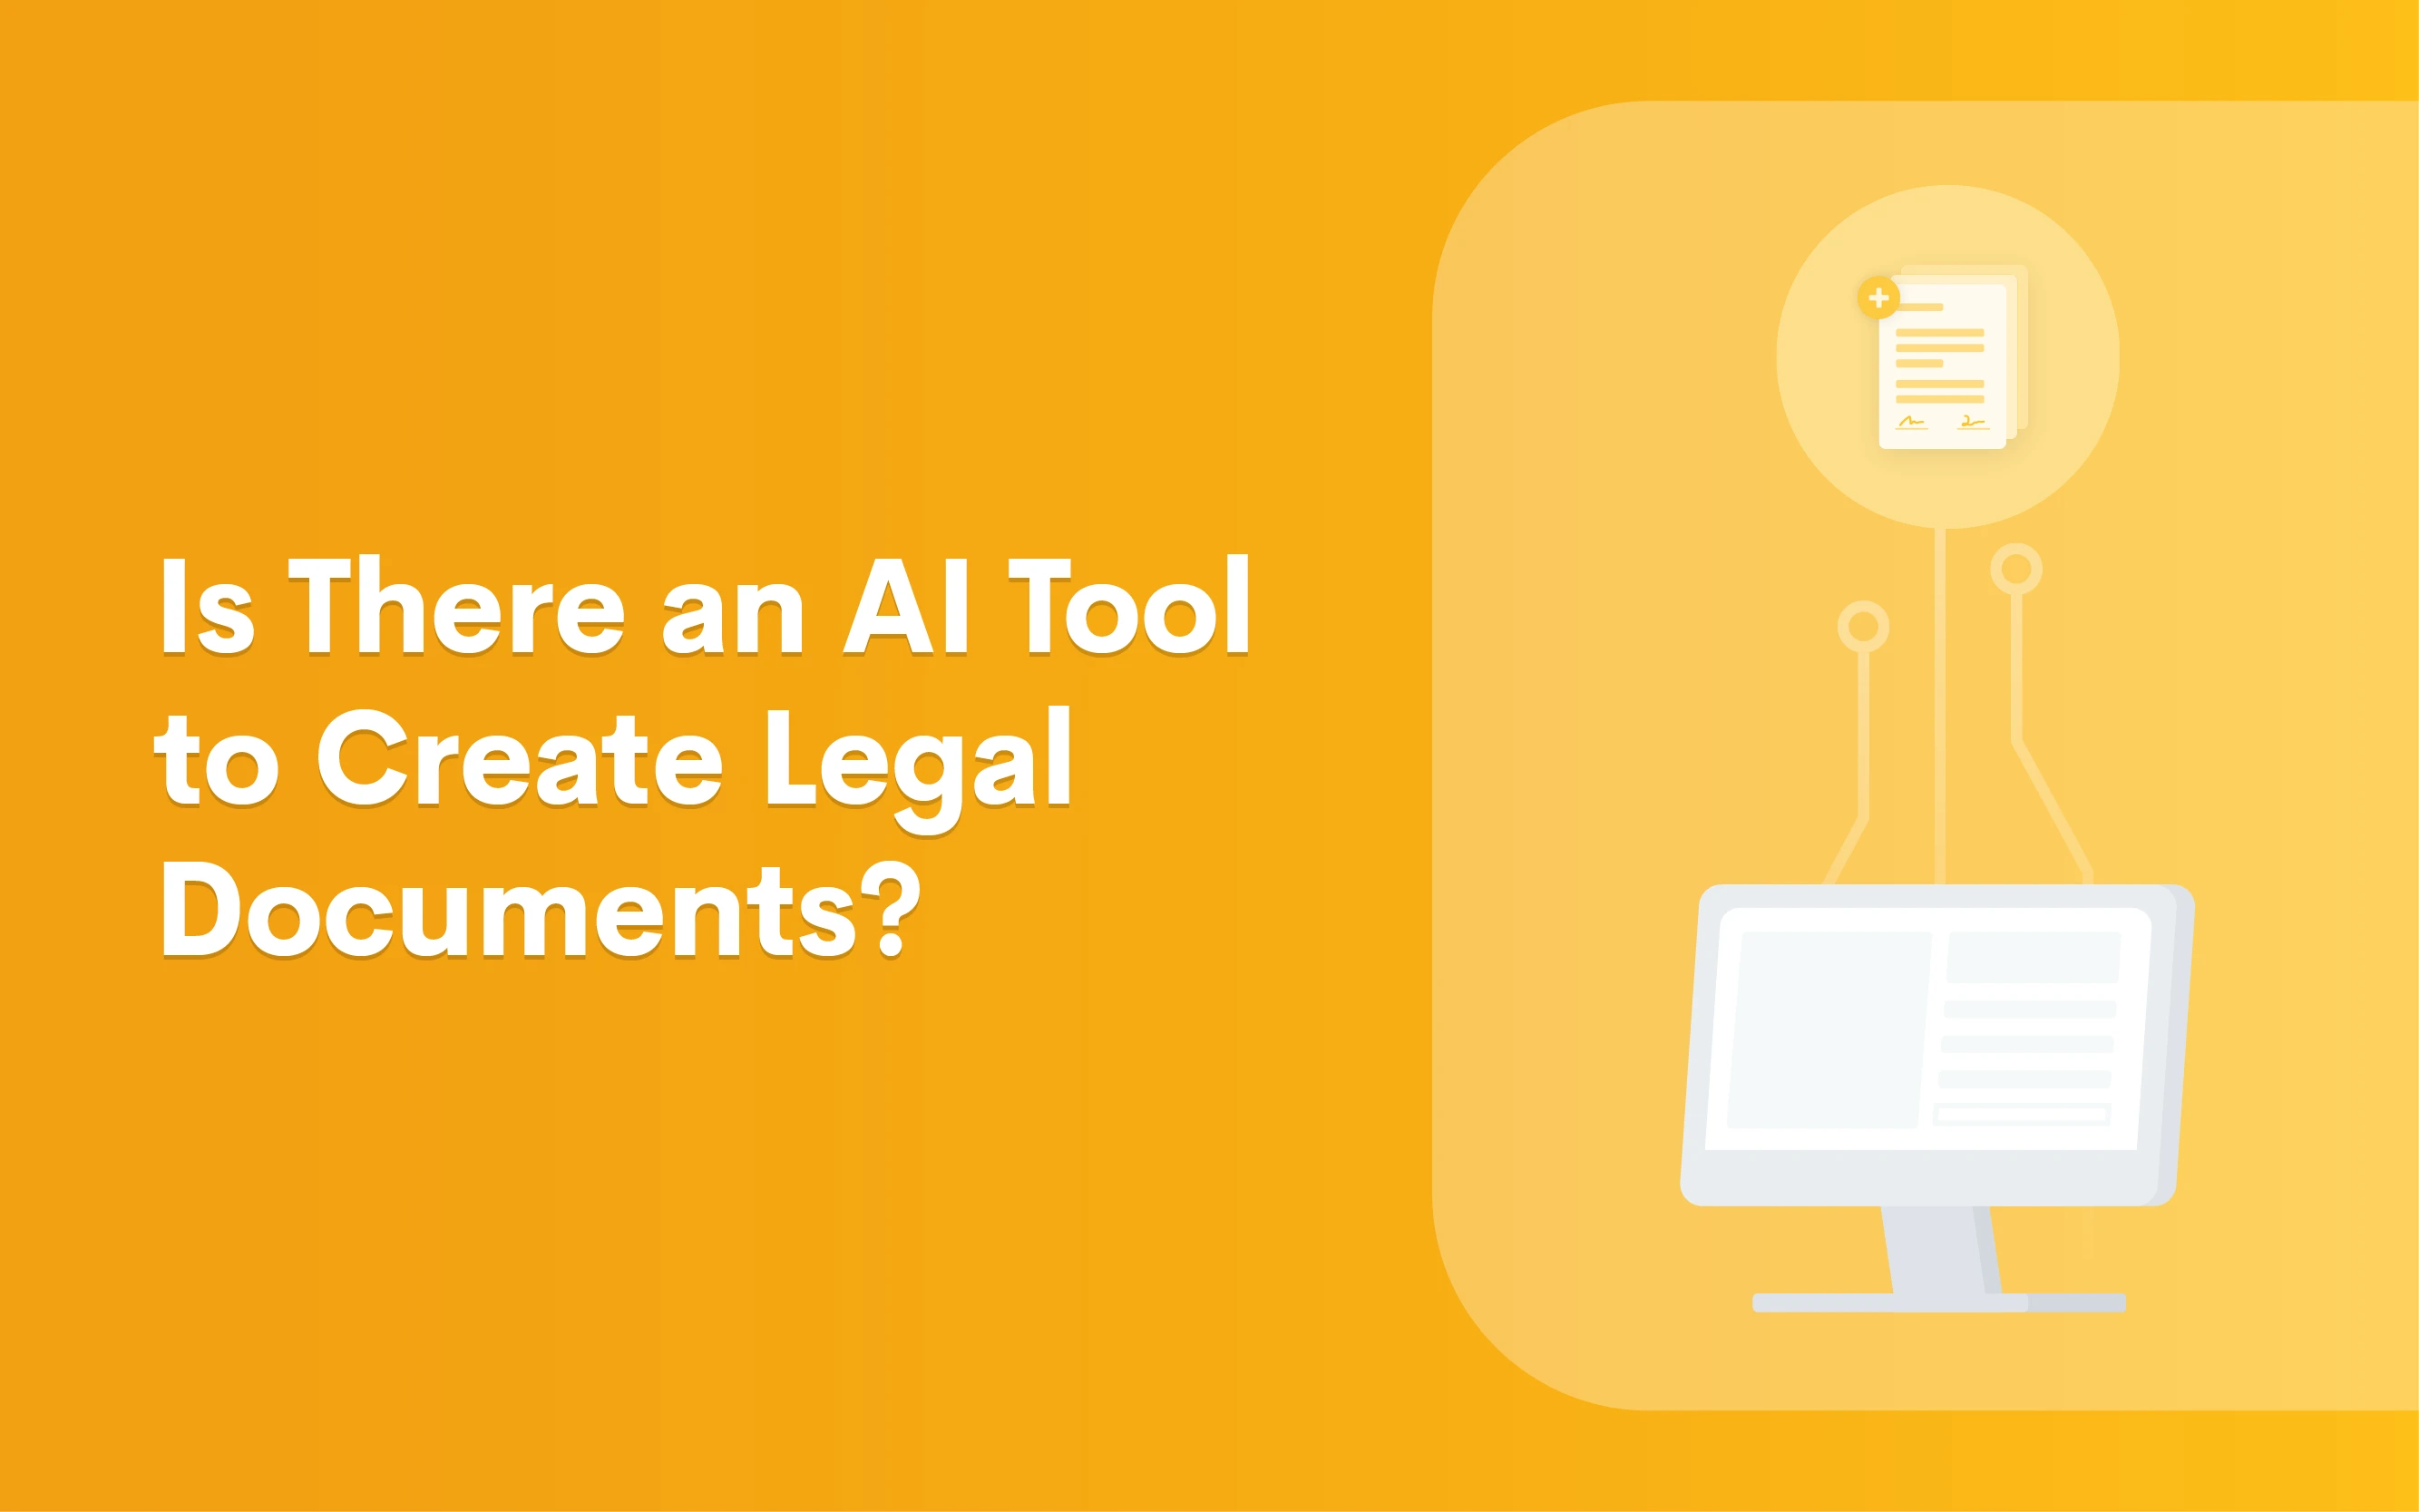 Is-there-an-AI-Tool-to-Create-Legal-Documents_BLOG-02